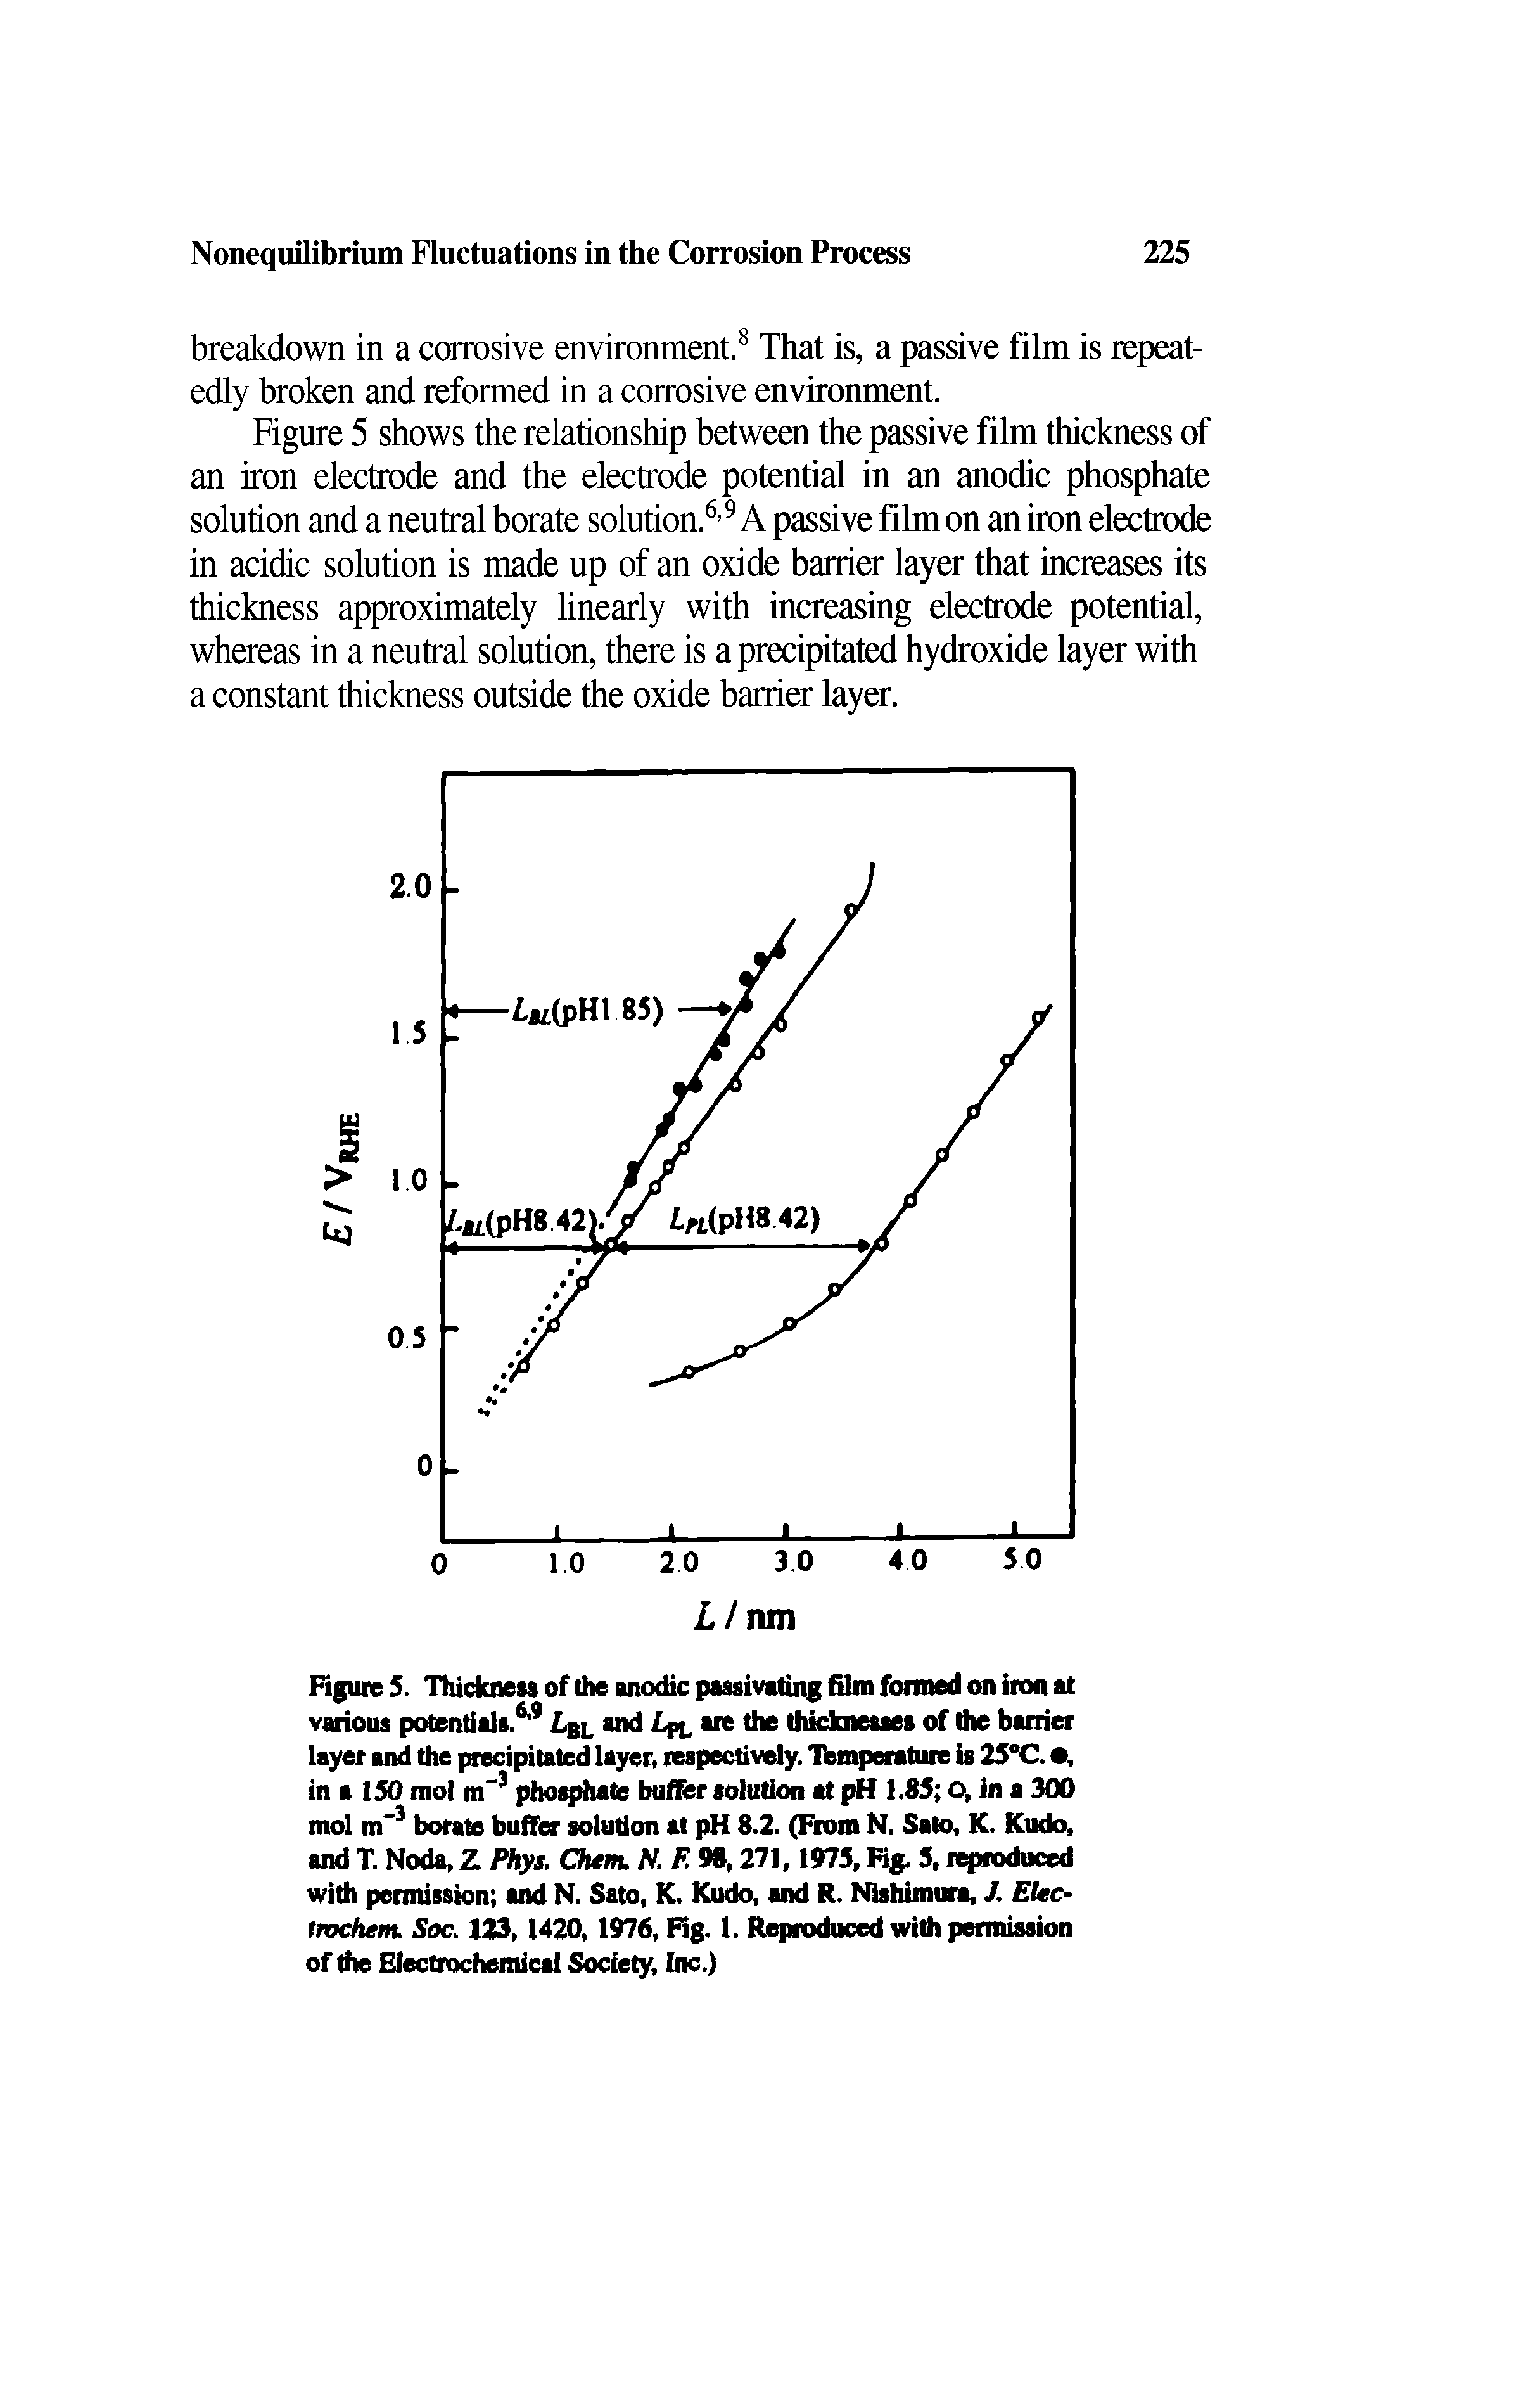 Figure 5. Thickness of the anodic passivating film formed on iron at various potentials.6 9 Lbl and Lr, are the thicknesses of the barrier layer and the precipitated layer, respectively. Temperature is 25°C. , in a 150 mol m 3 phosphate buffer solution at pH 1.85 O, in a 300 mol m 3 borate buffer solution at pH 8.2. (From N. Sato, K. Kudo, and T. Noda, Z Phys. Chem. N. F. 98,271,1975, Fig. 5, reproduced with permission and N. Sato, K. Kudo, and R. Nishimura, / Elec-trochem. Soc, 123,1420,1976, Fig. 1. Reproduced with permission of the Electrochemical Society, Inc.)...